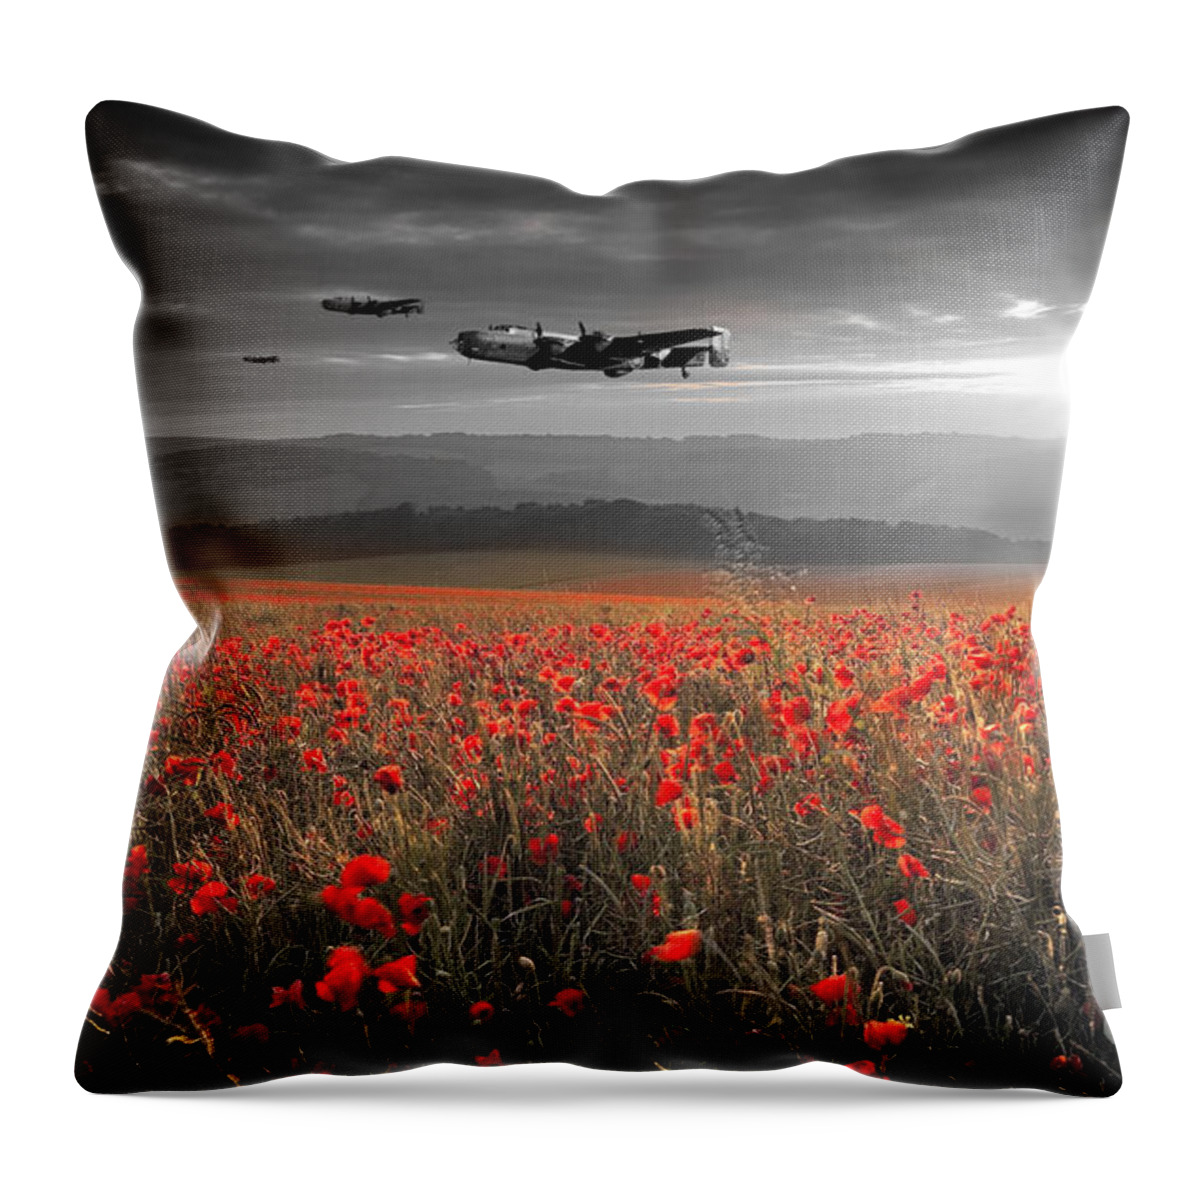 Handley Page Halifax Throw Pillow featuring the digital art Halifax Bomber Boys by Airpower Art